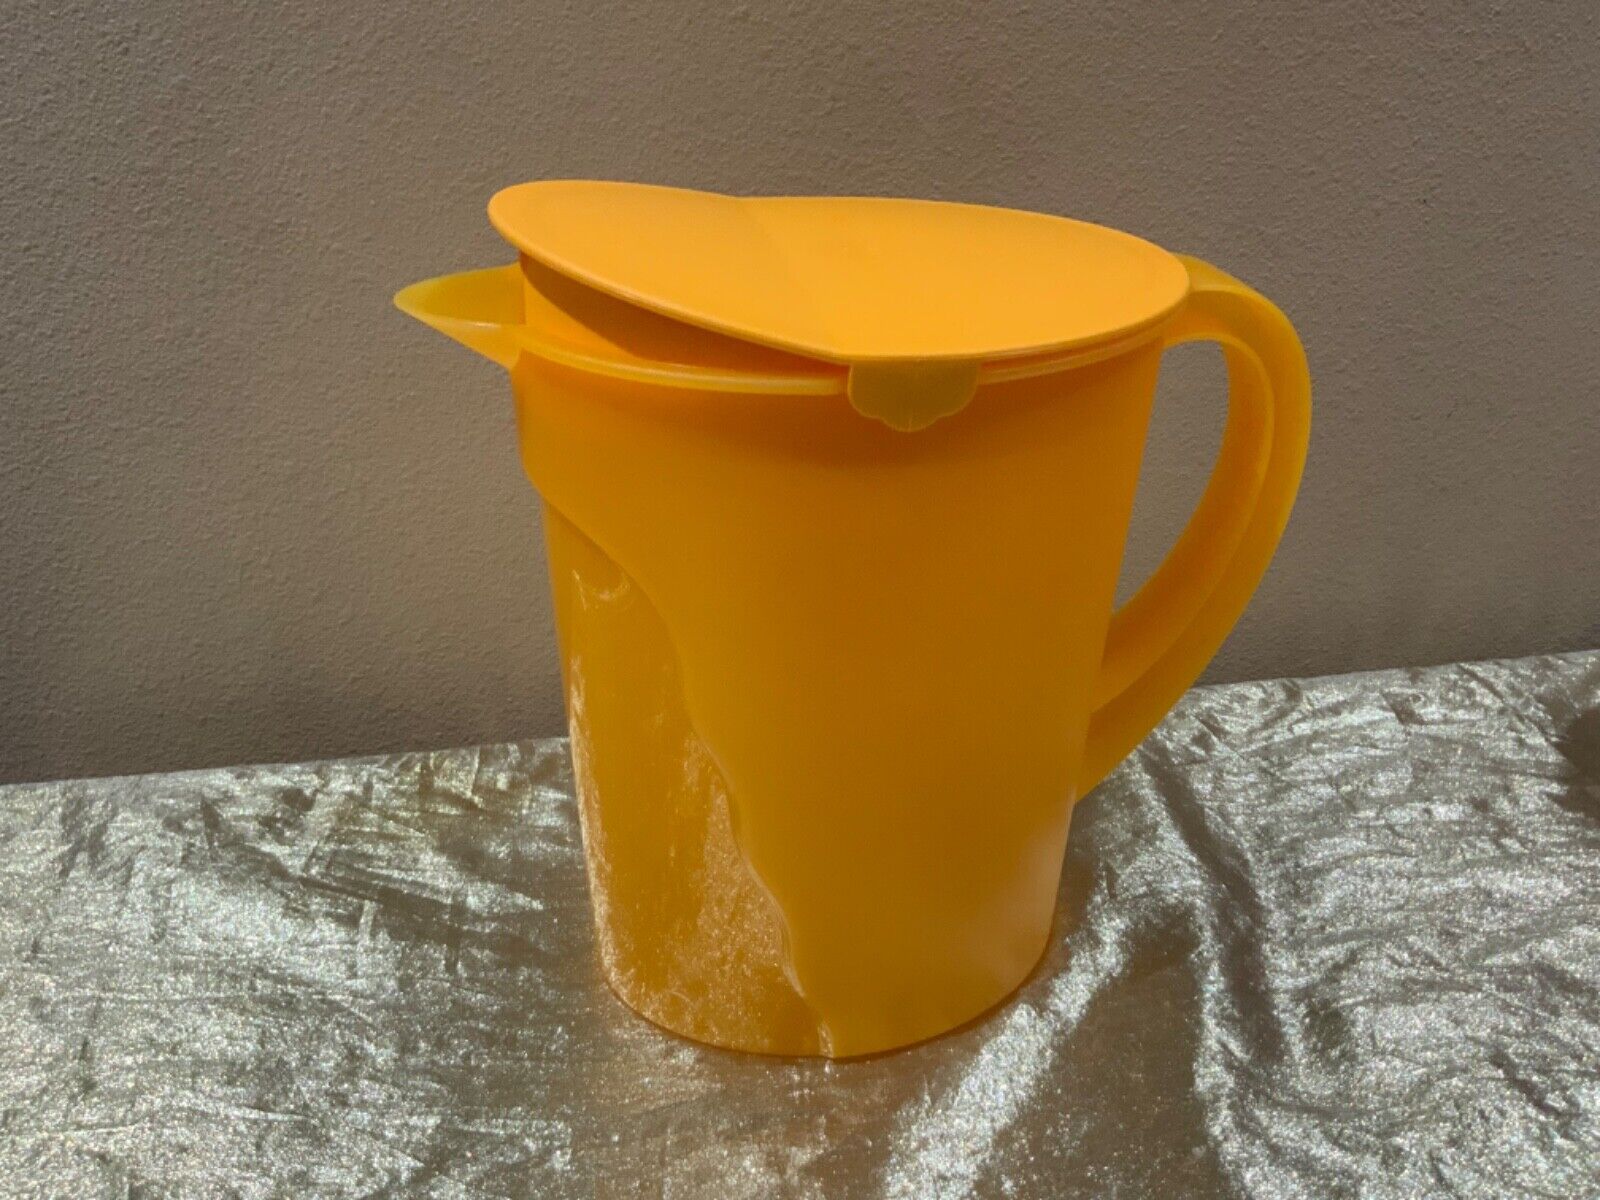 New Tupperware Beautiful Jumbo Expression Pitcher 1 Gallon 3.7L Sunflower Color